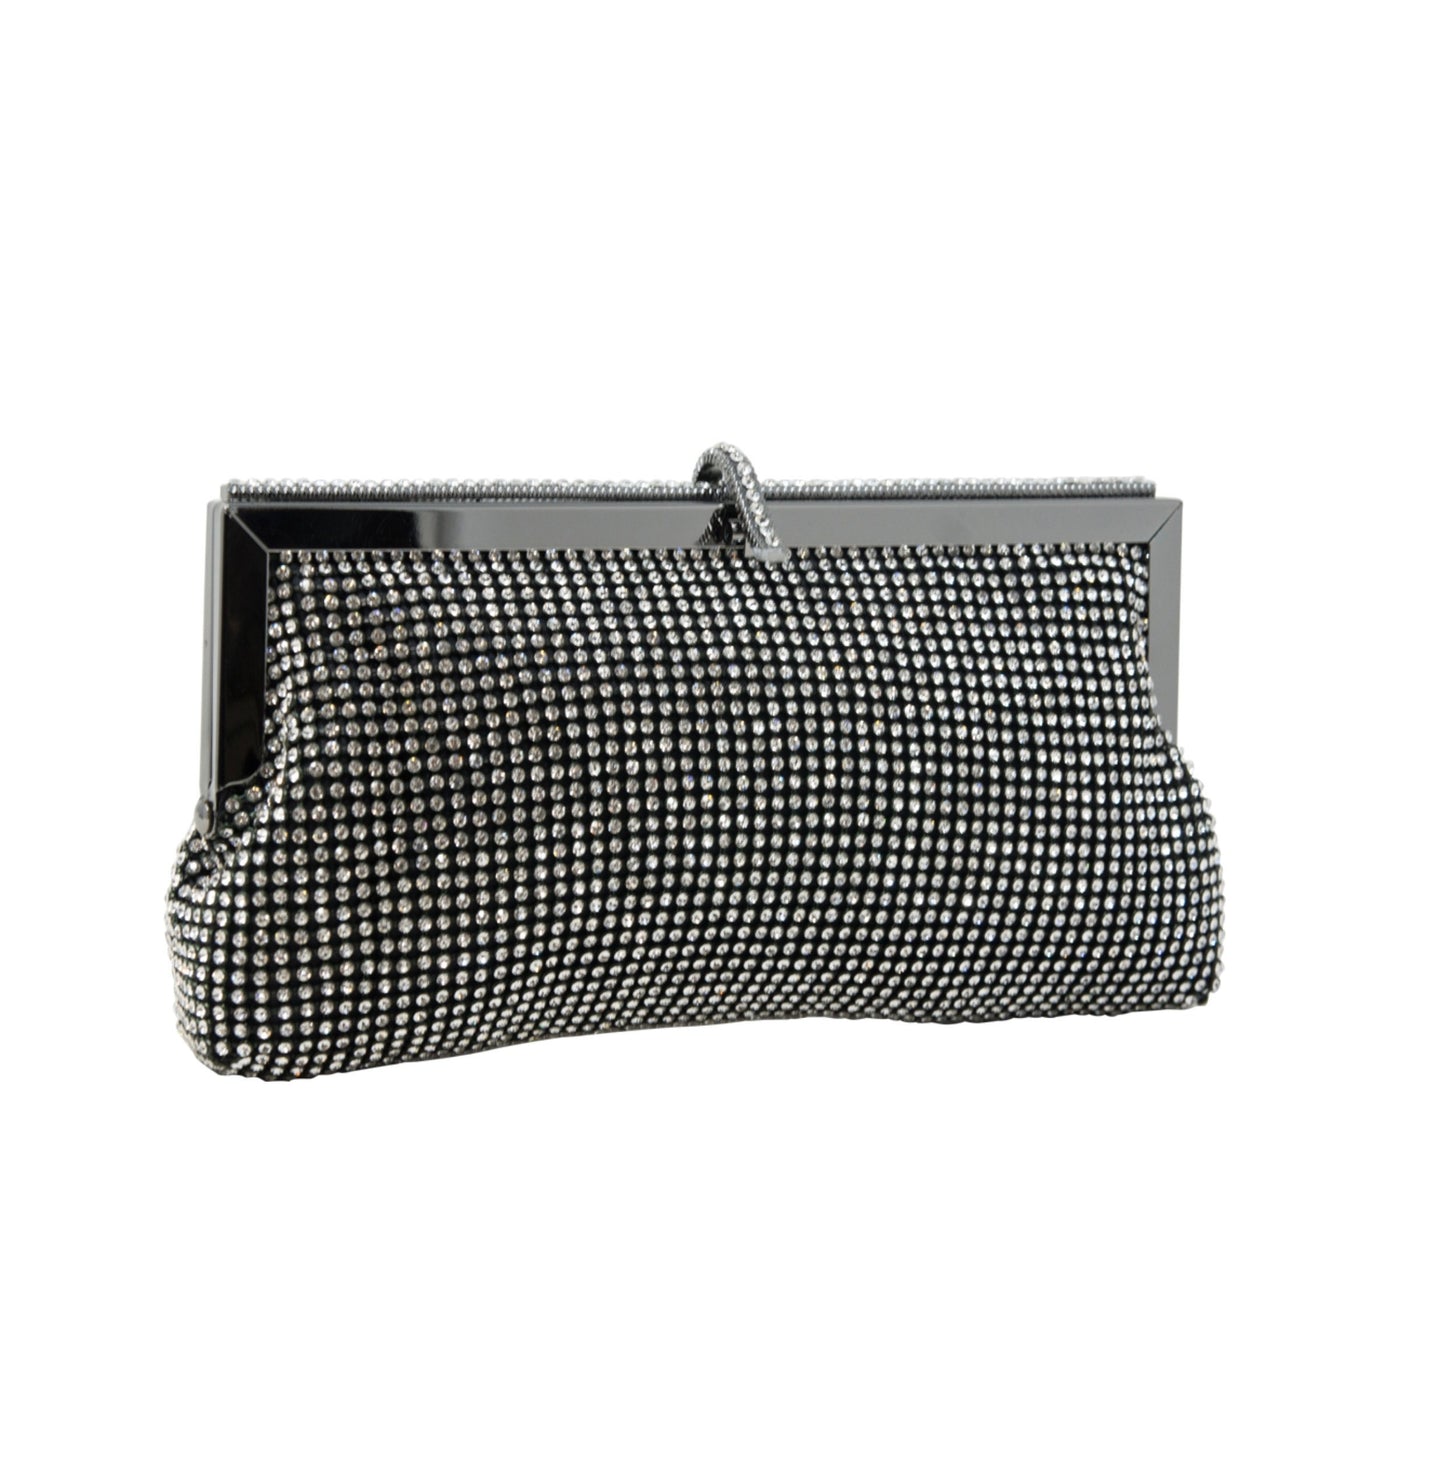 Sparkly Black Silver Clasp Wedding Event Clutch Bag Shoulder Bag perfect eye-catching Silver Diamante Bridesmaid Gift Present Wedding Party